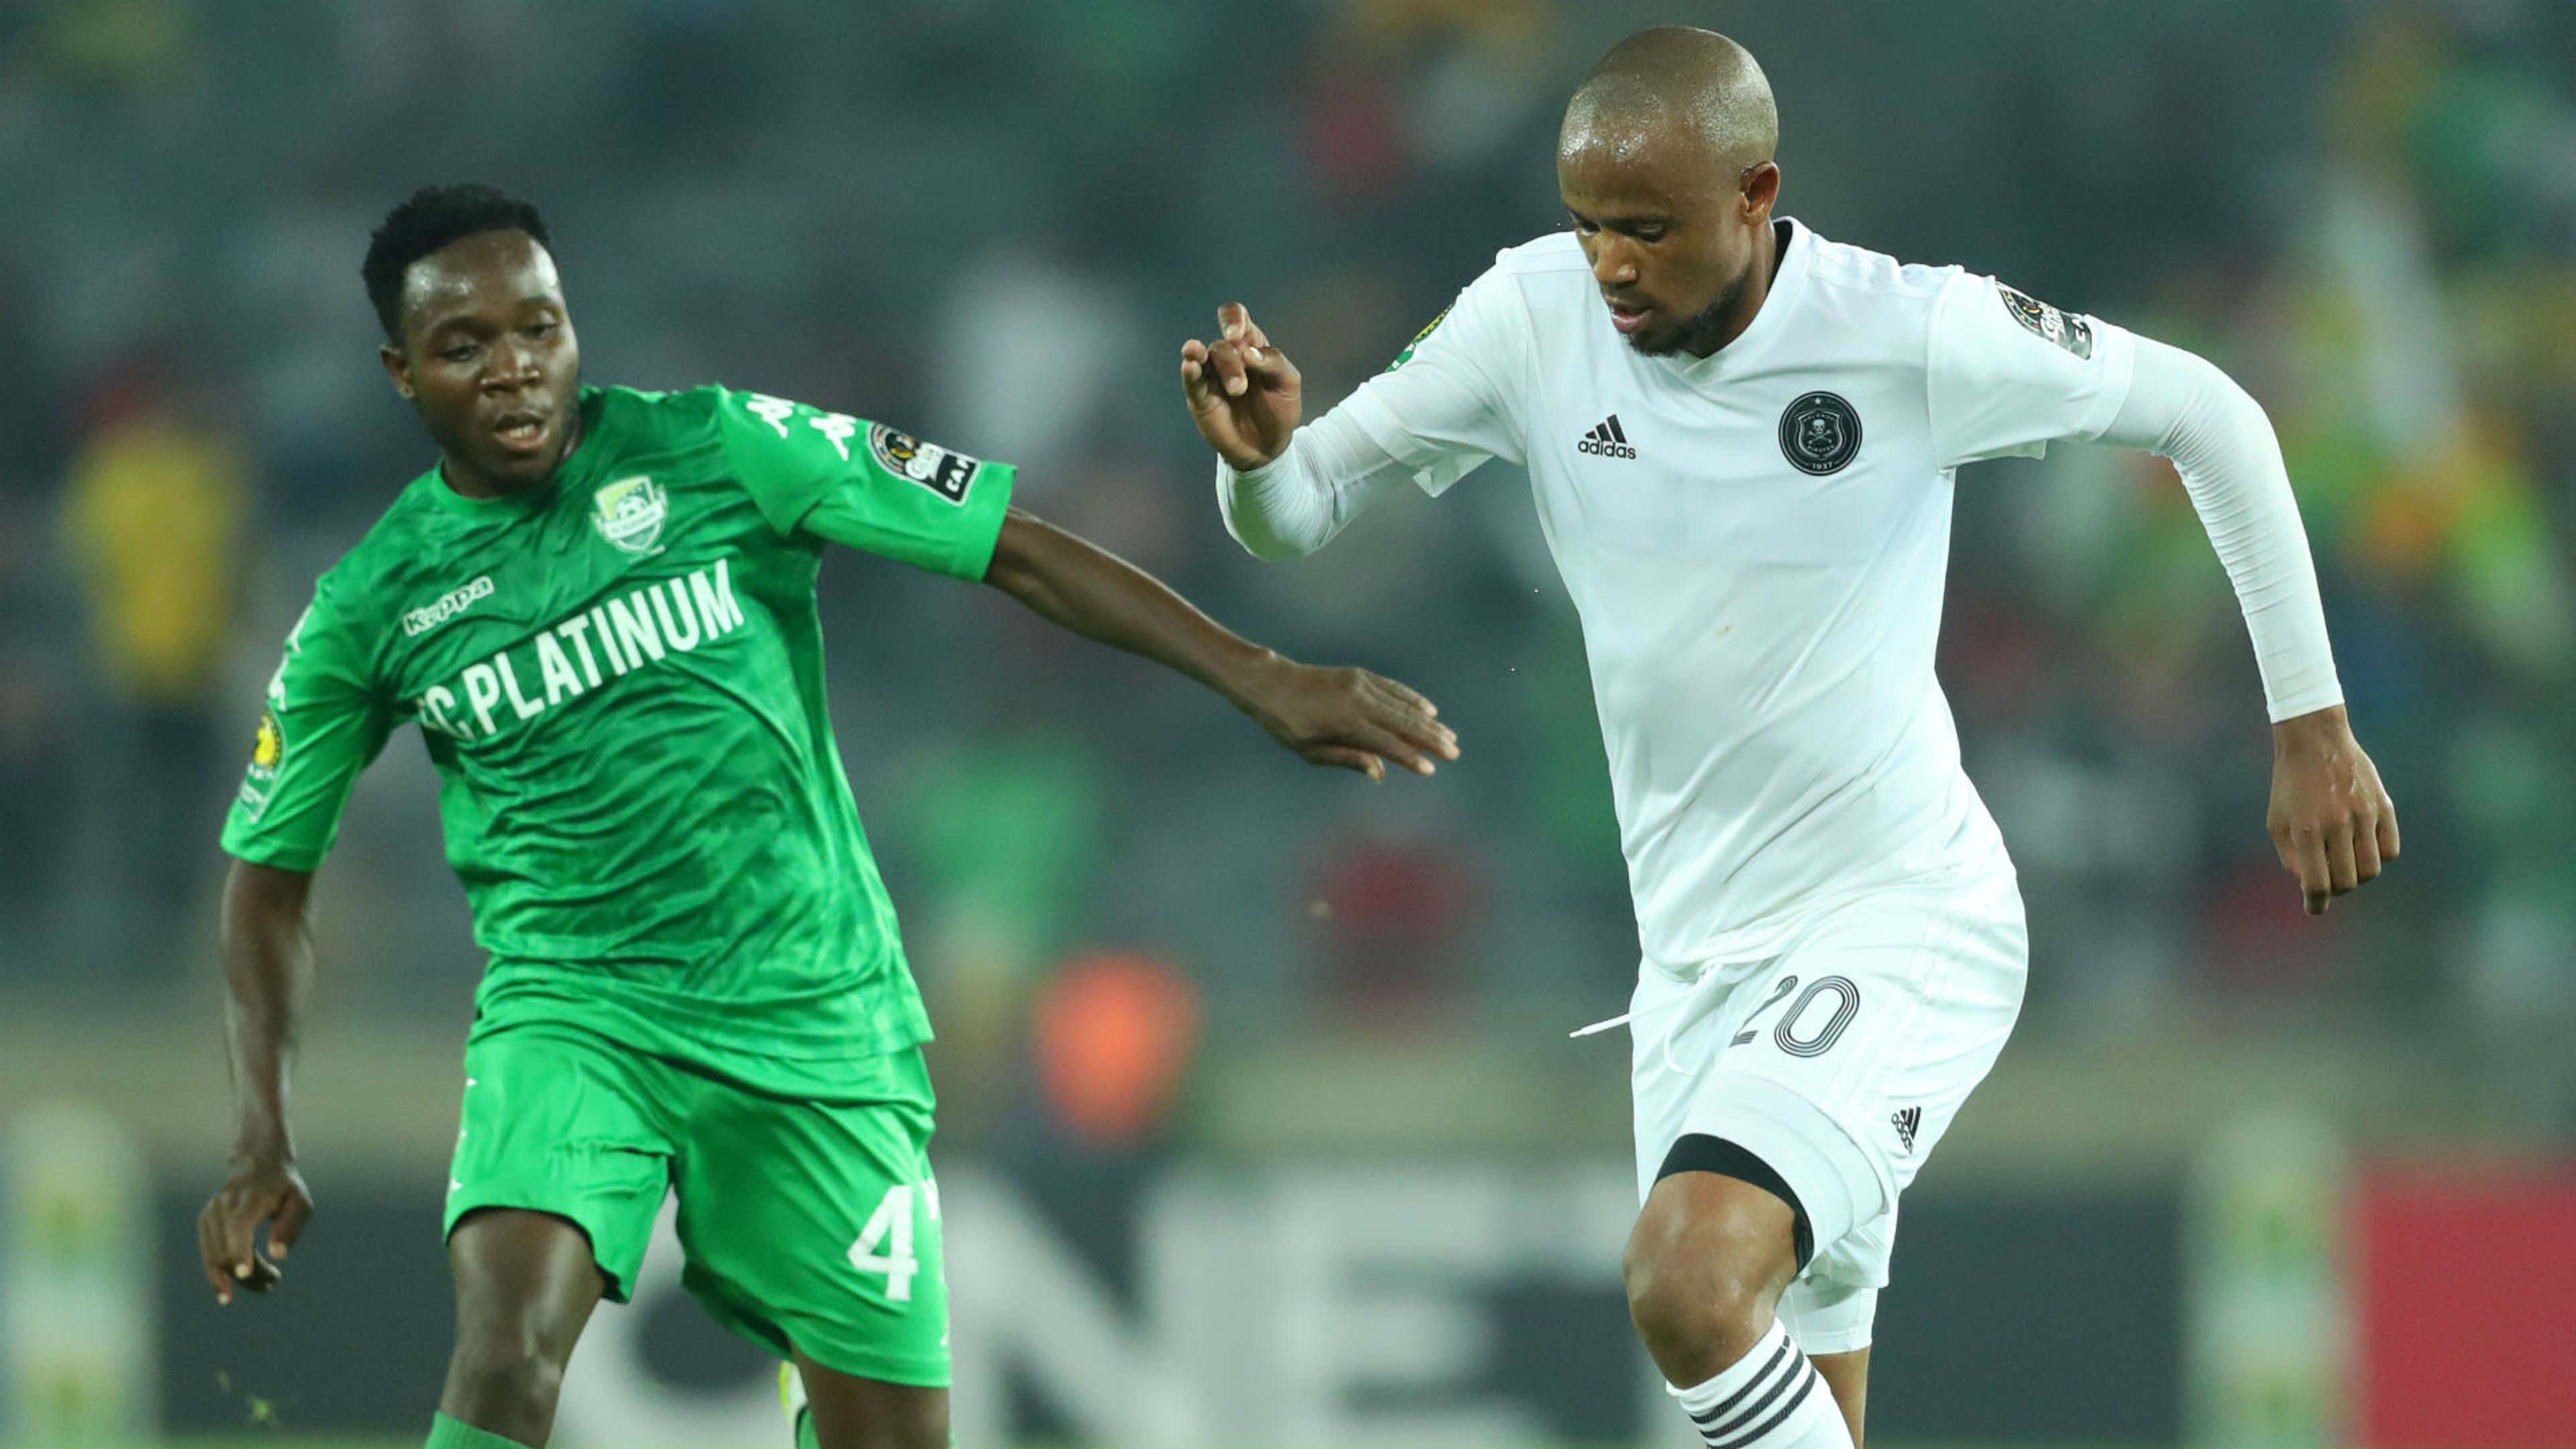 Xola Mlambo of Orlando Pirates challenged by Perfect Chikwende of FC Platinum, March 2019